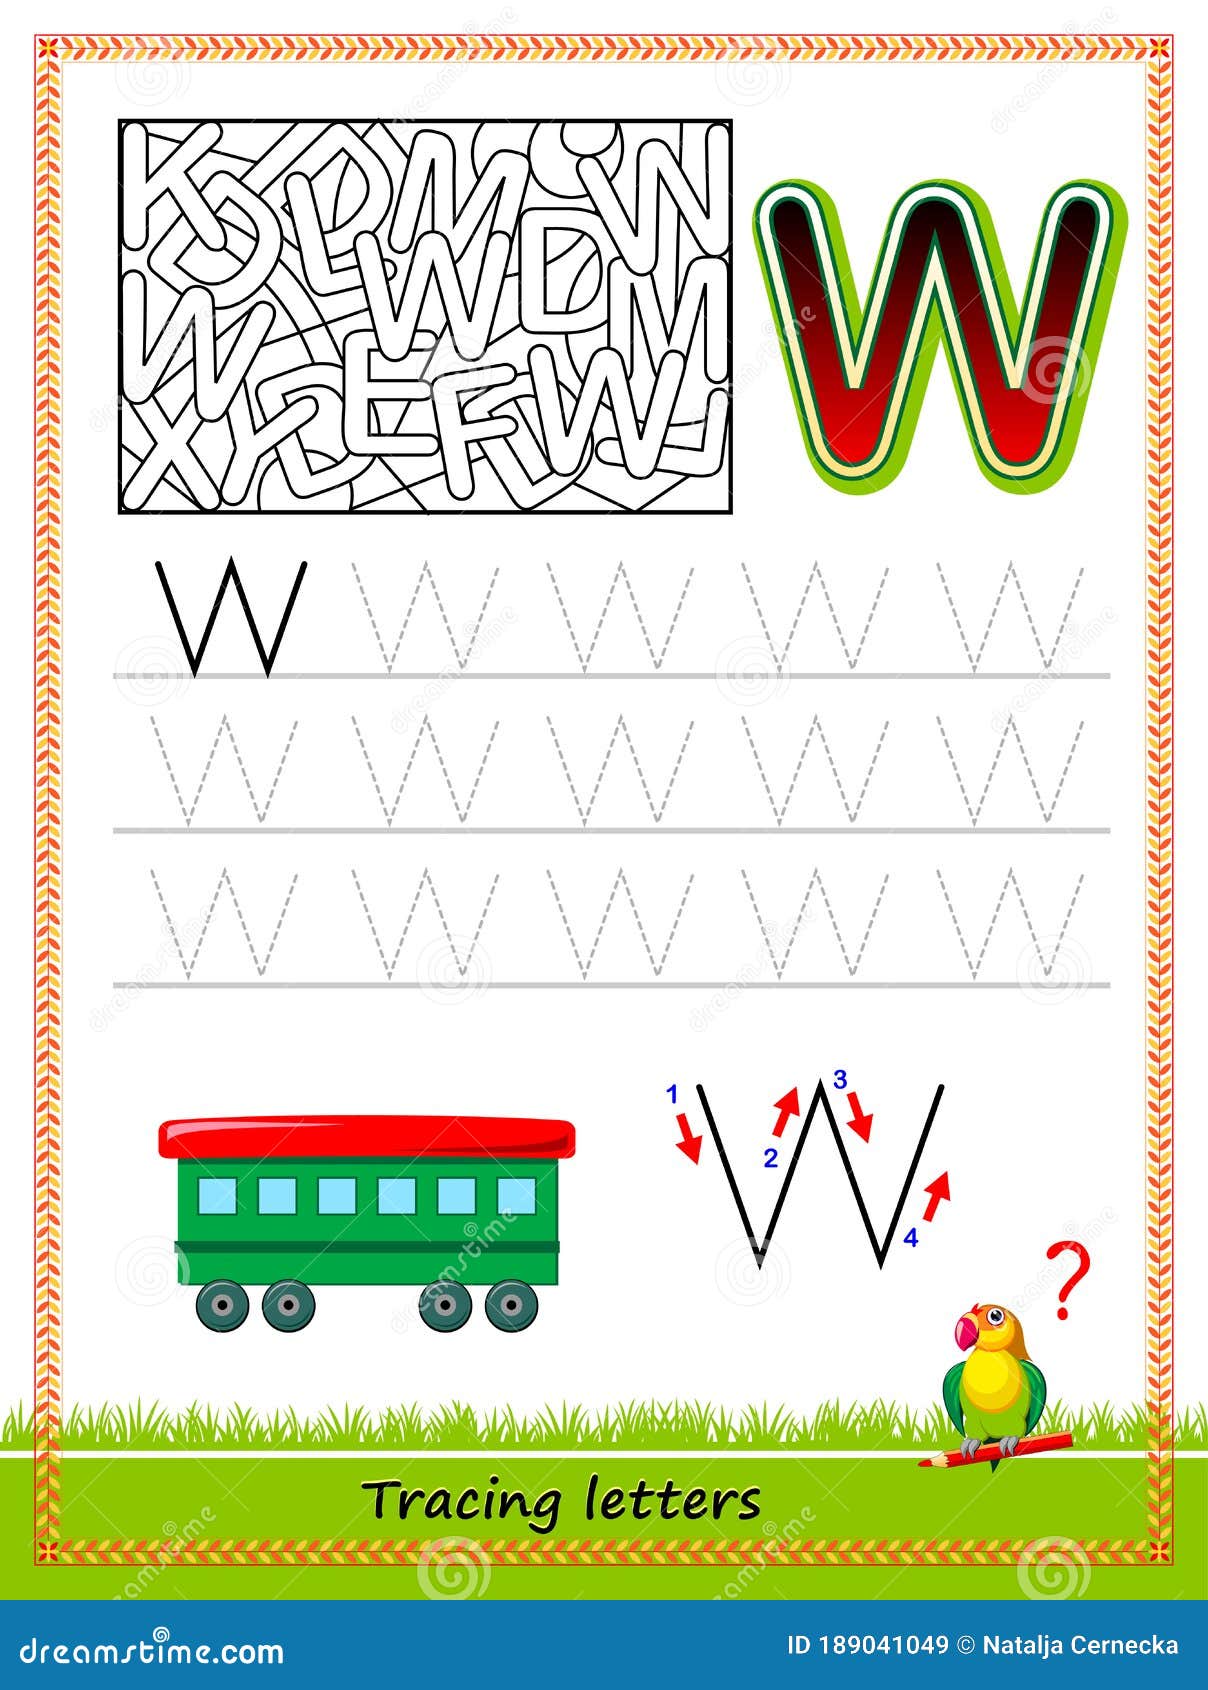 Worksheet for tracing letters find and paint all letters w kids activity sheet educational page for children coloring book stock vector